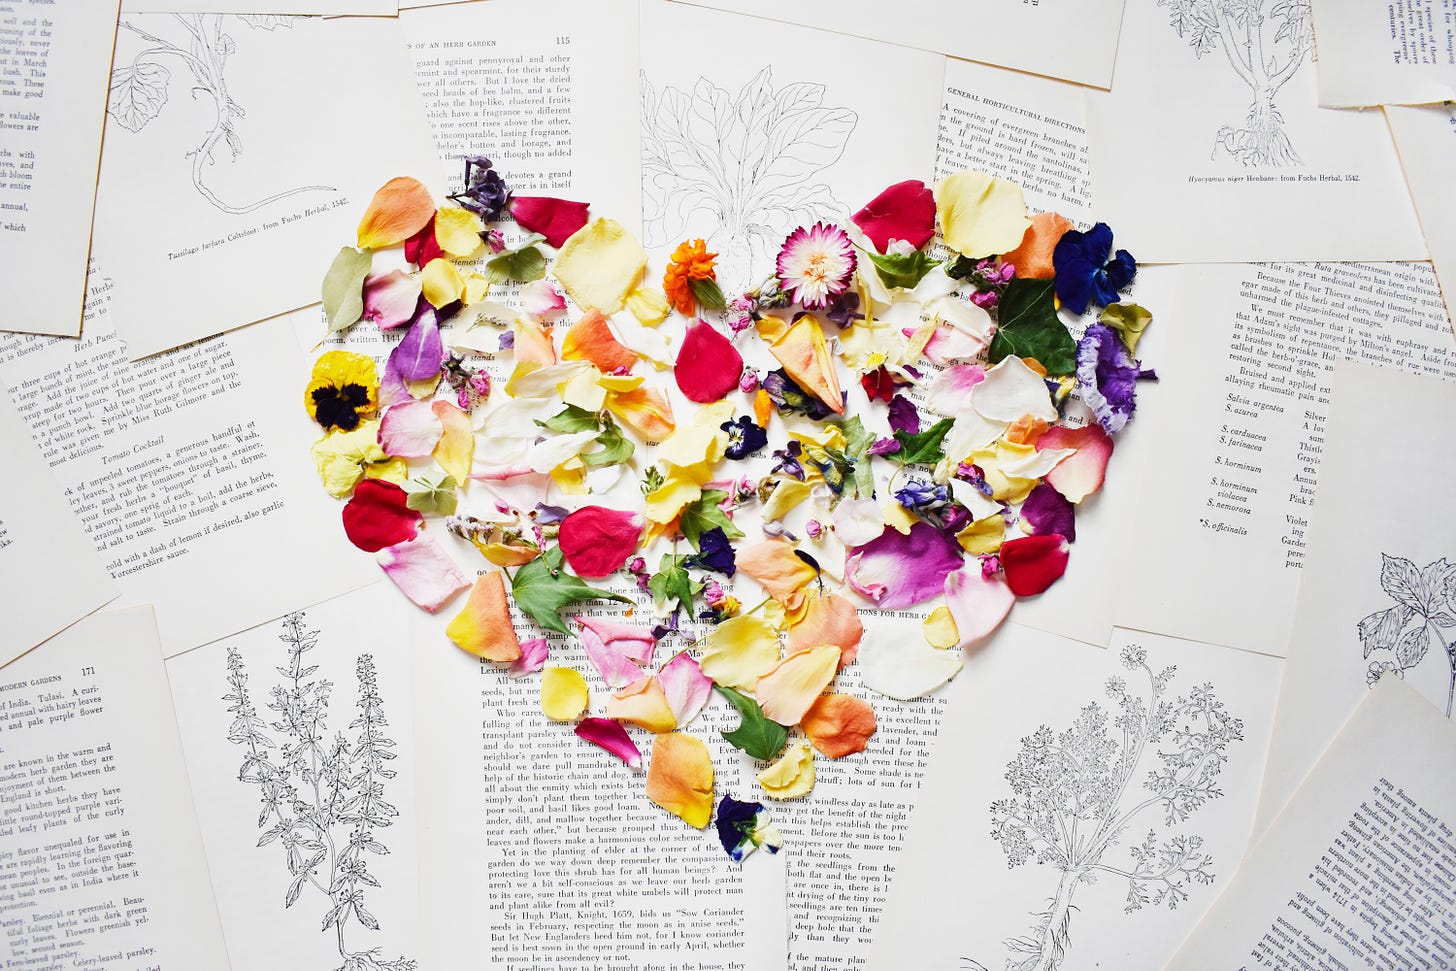 heart shape made of flower petals on top of book pages about flowers and plants